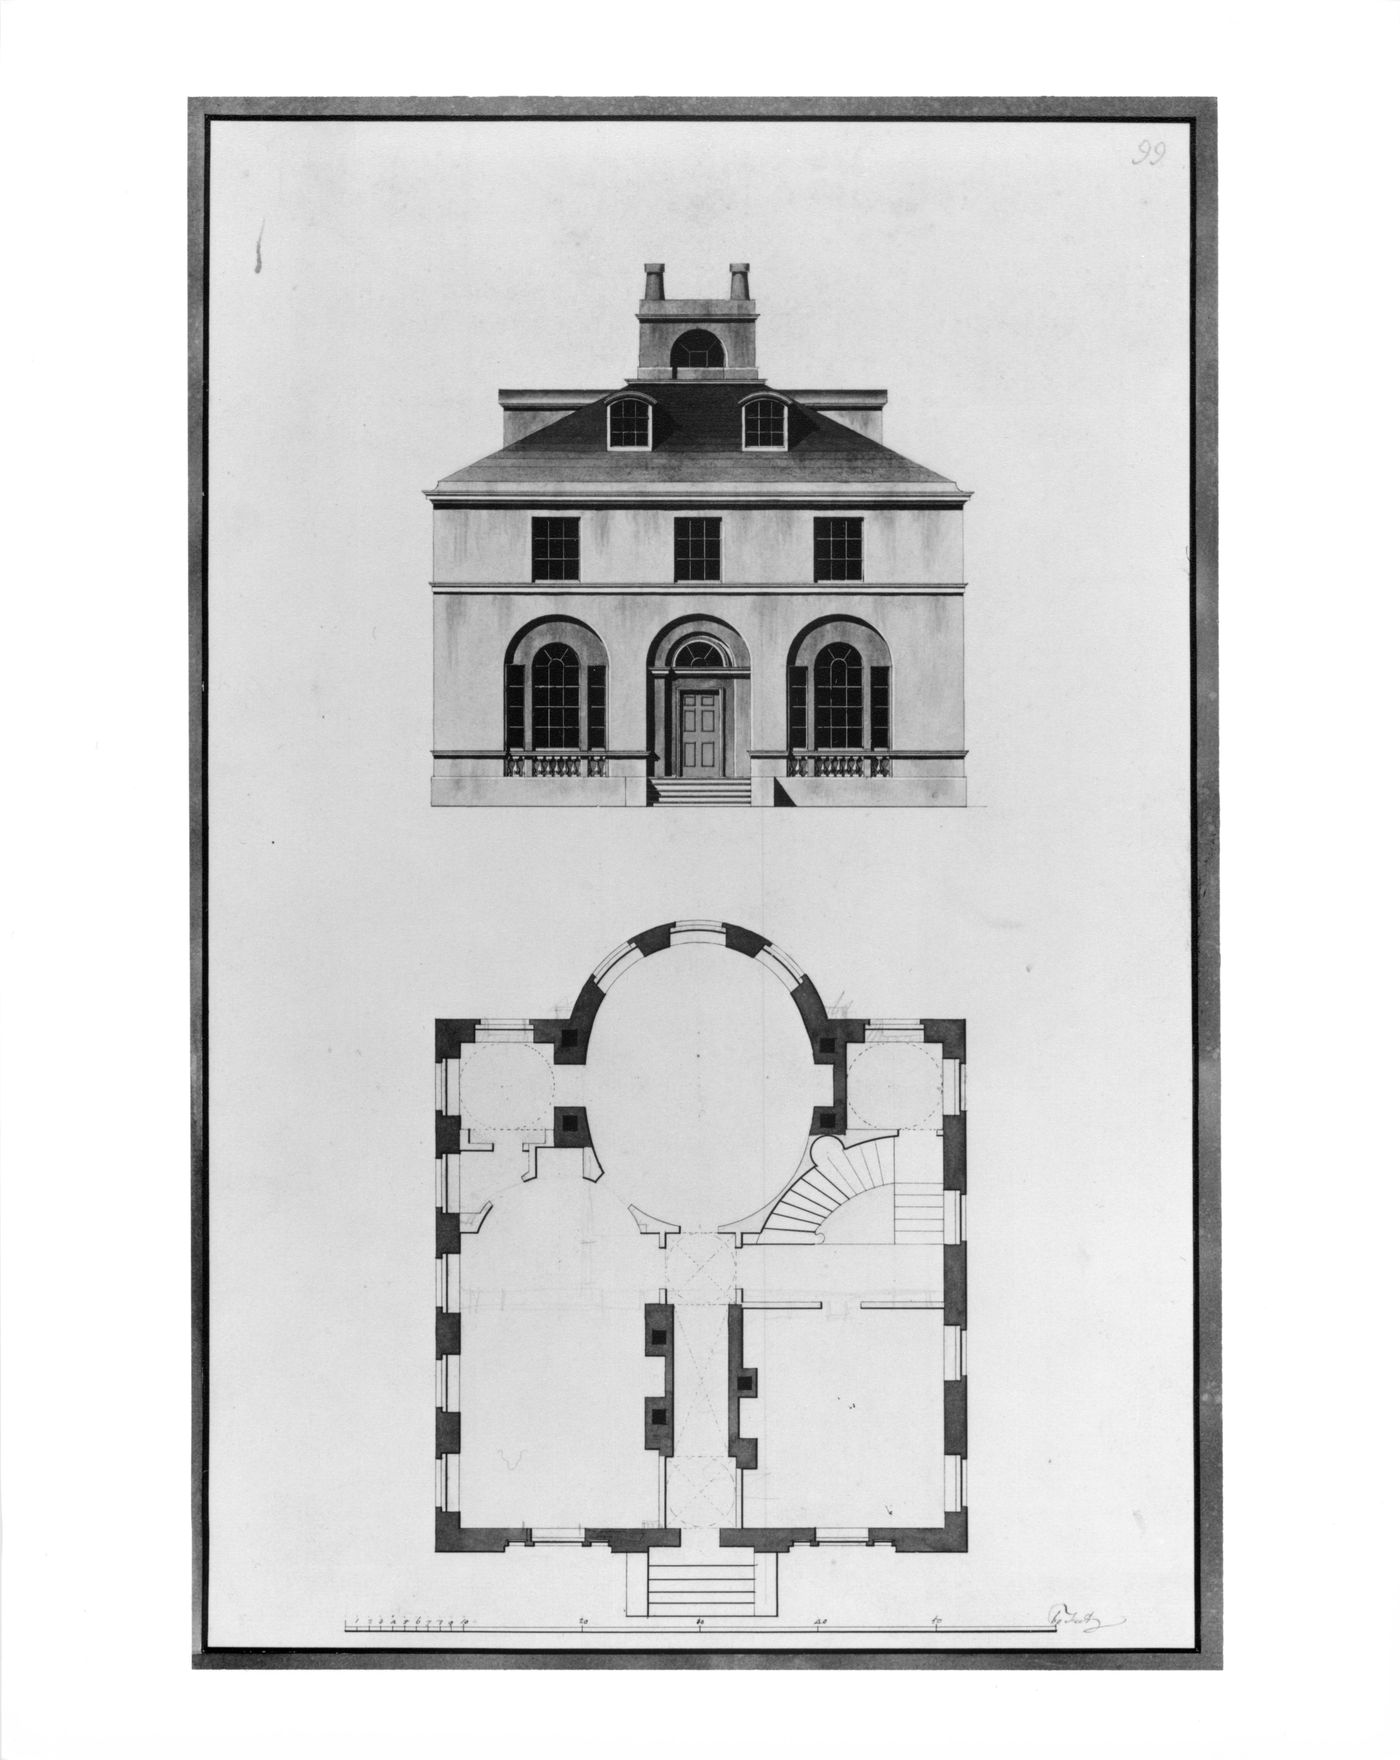 Design for a house - front elevation and plan